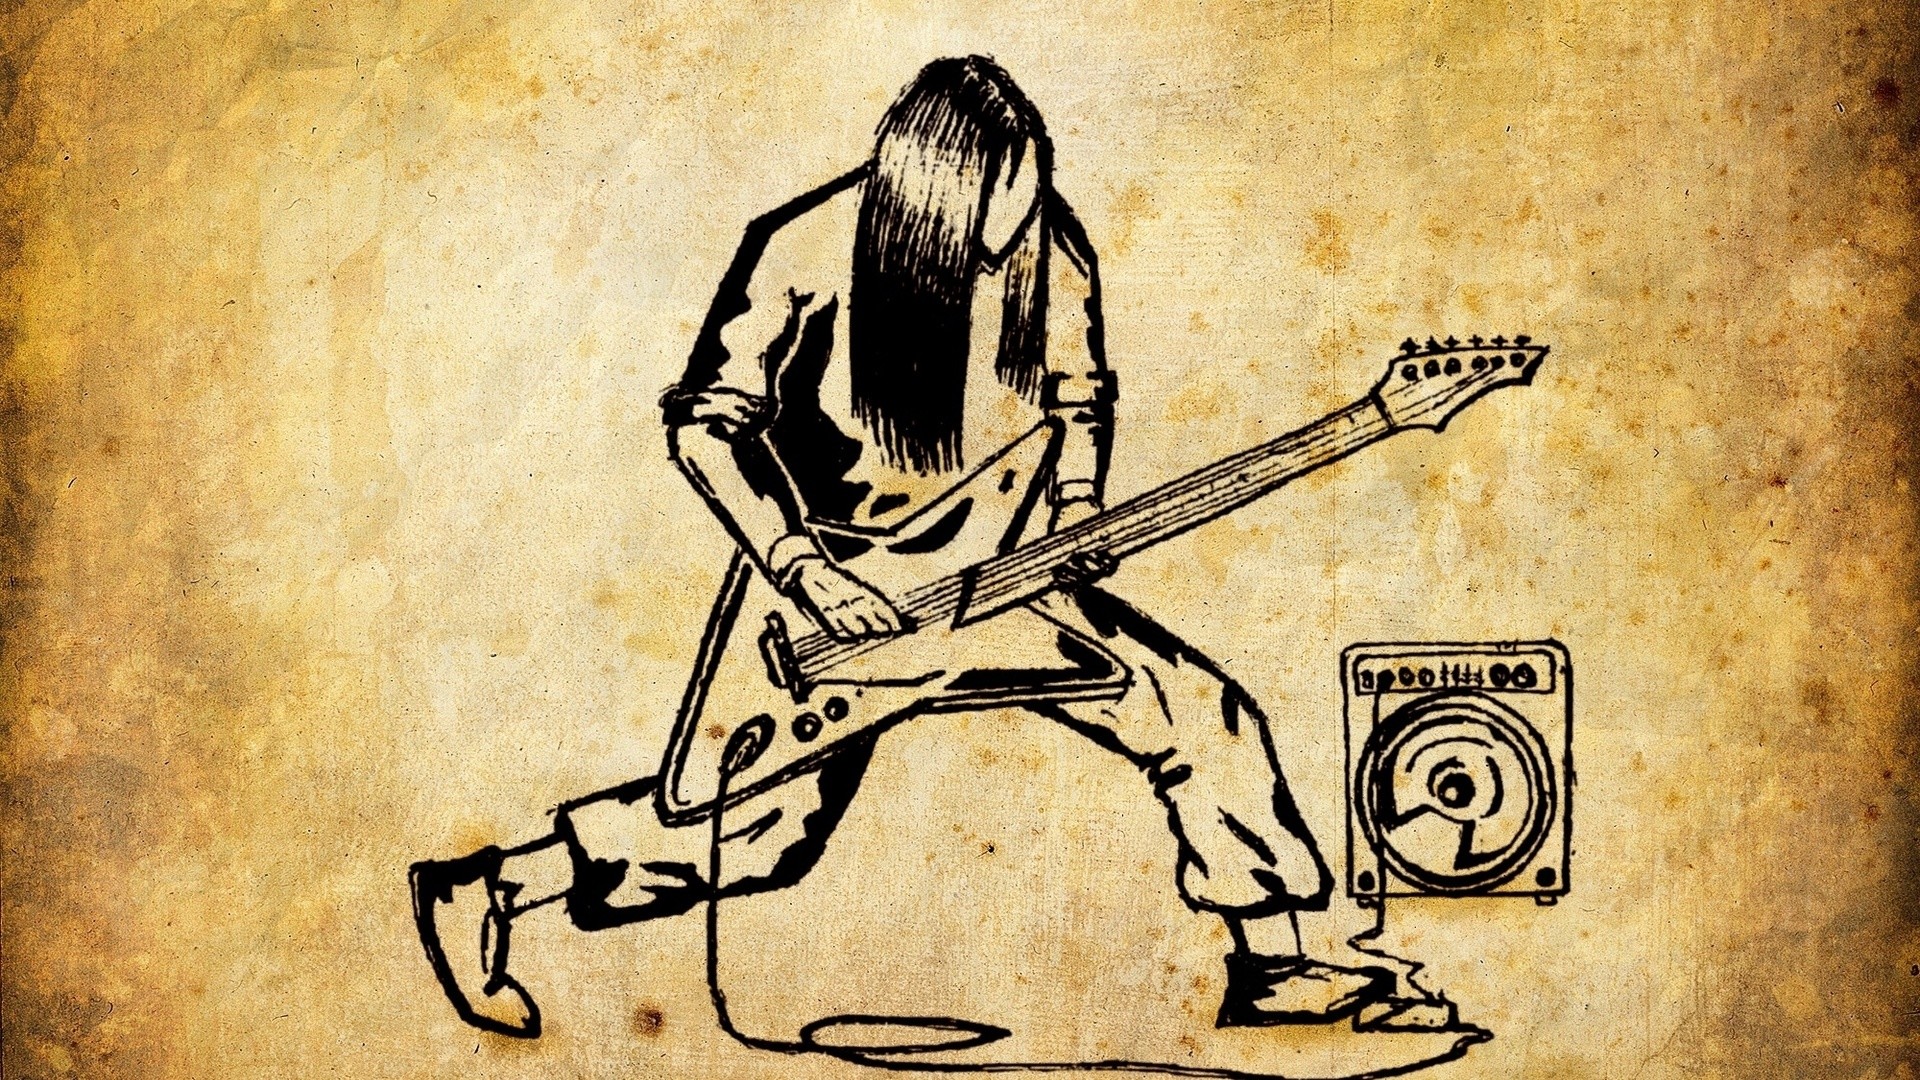 Free Download 71 Rock Music Wallpapers On Wallpaperplay 1920x1080 For